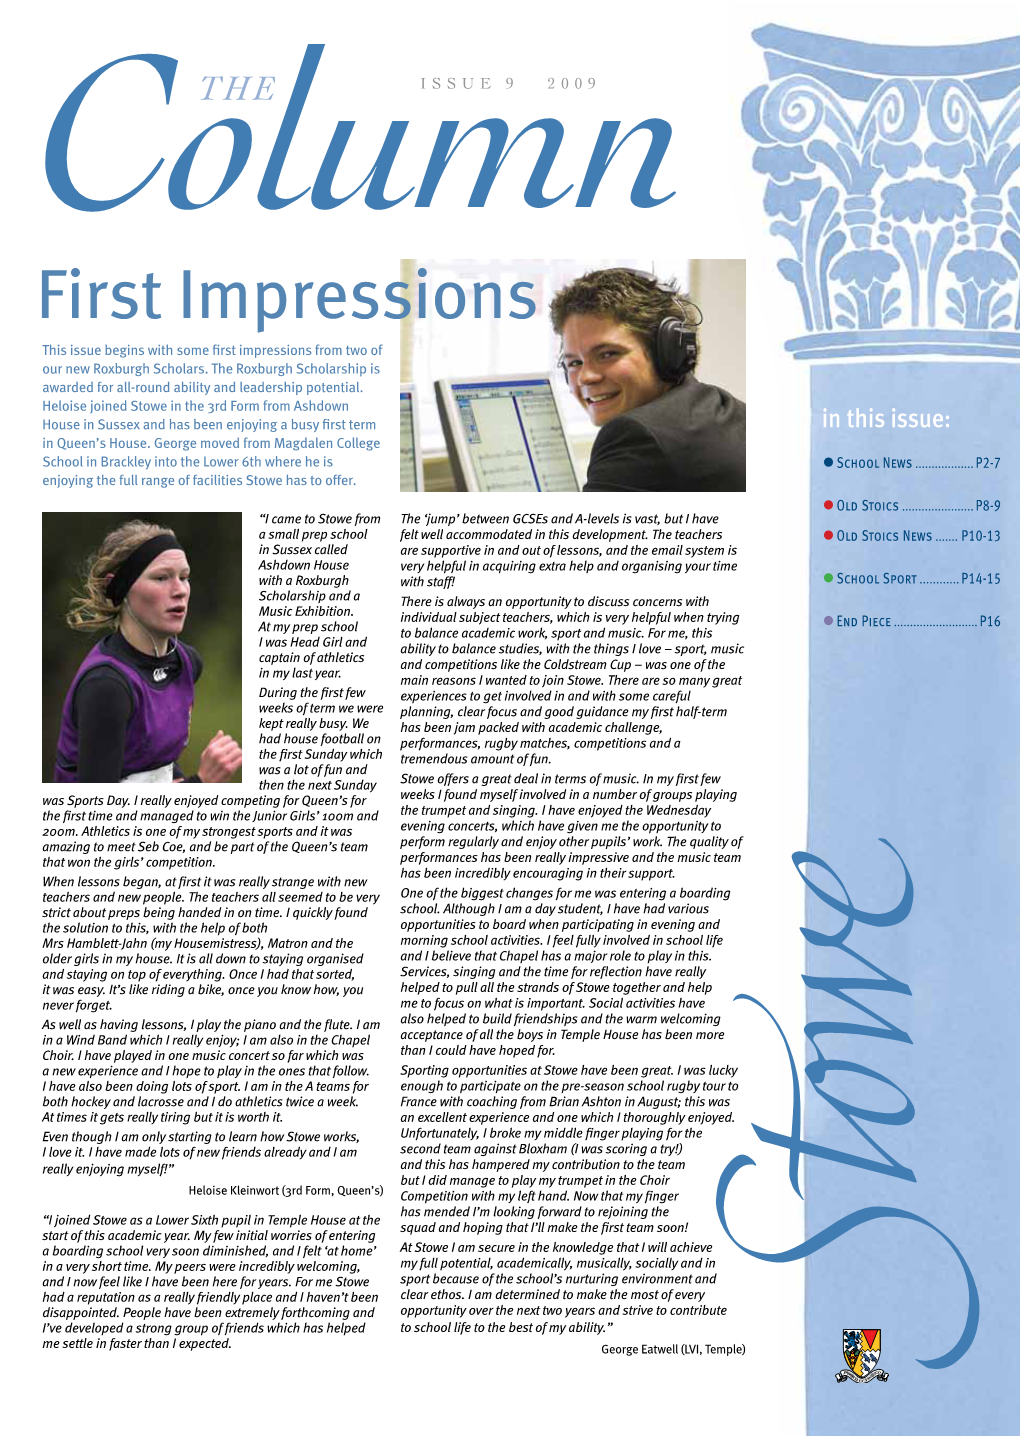 First Impressions This Issue Begins with Some First Impressions from Two of Our New Roxburgh Scholars